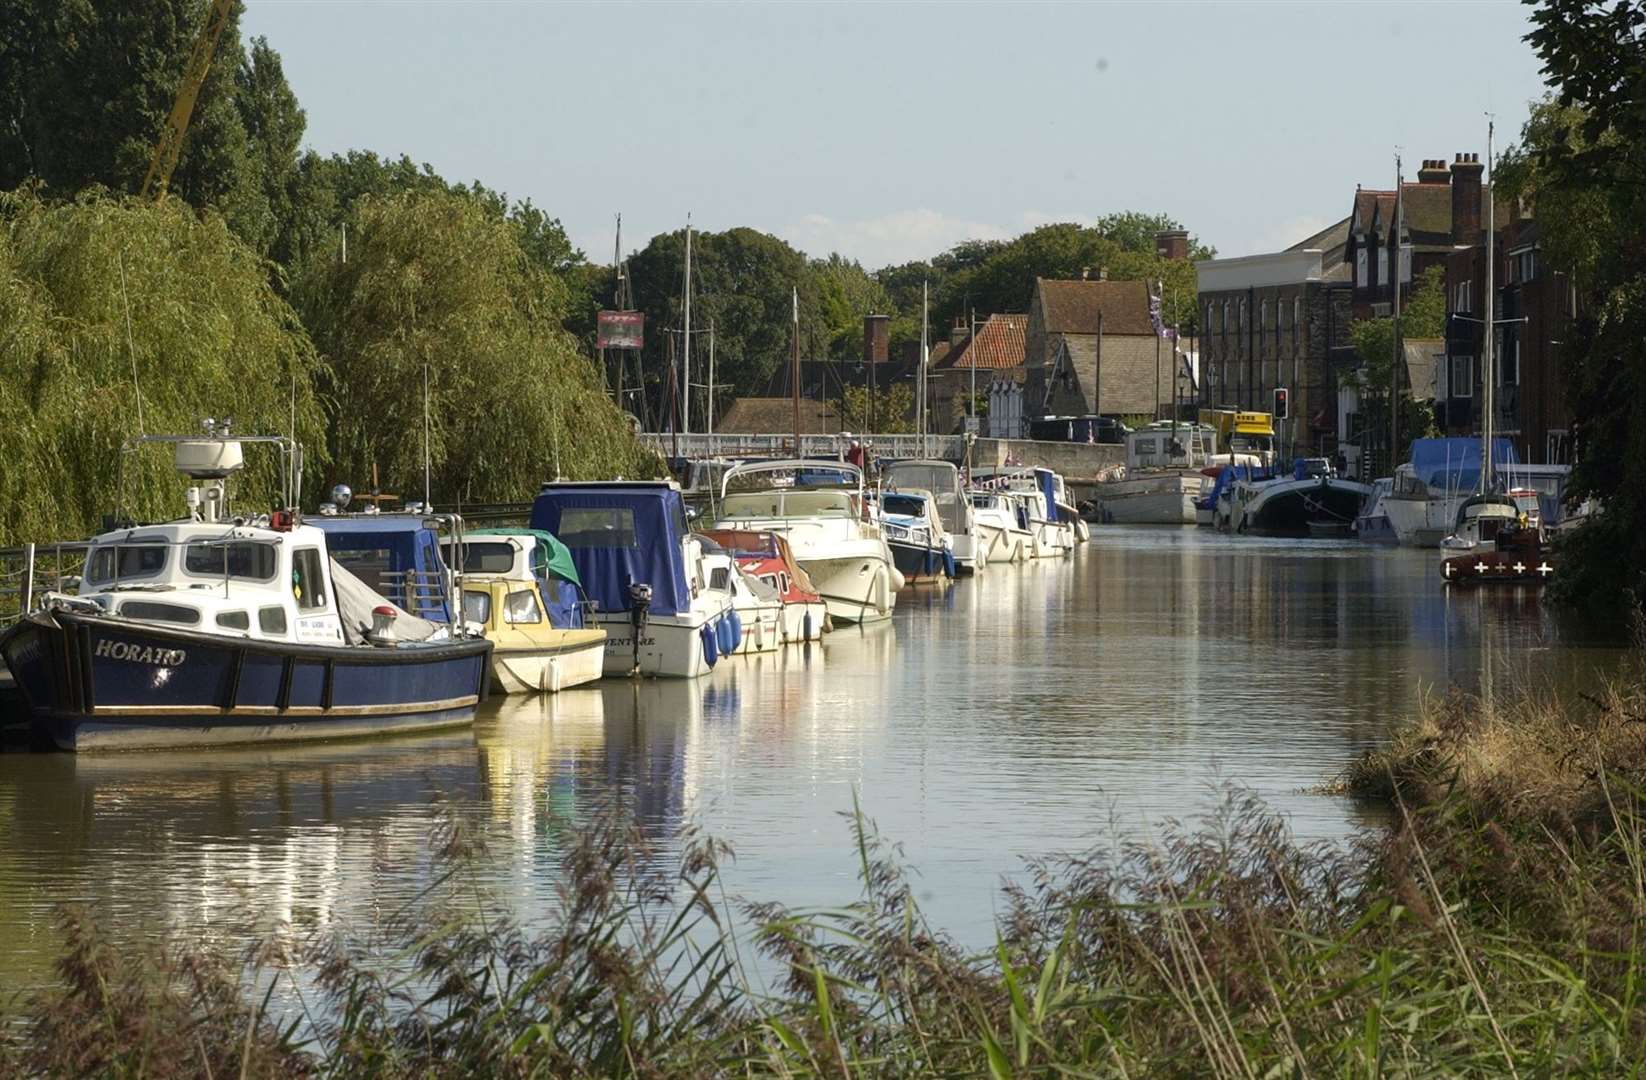 The river Stour at Sandwich. Picture by Terry Scott